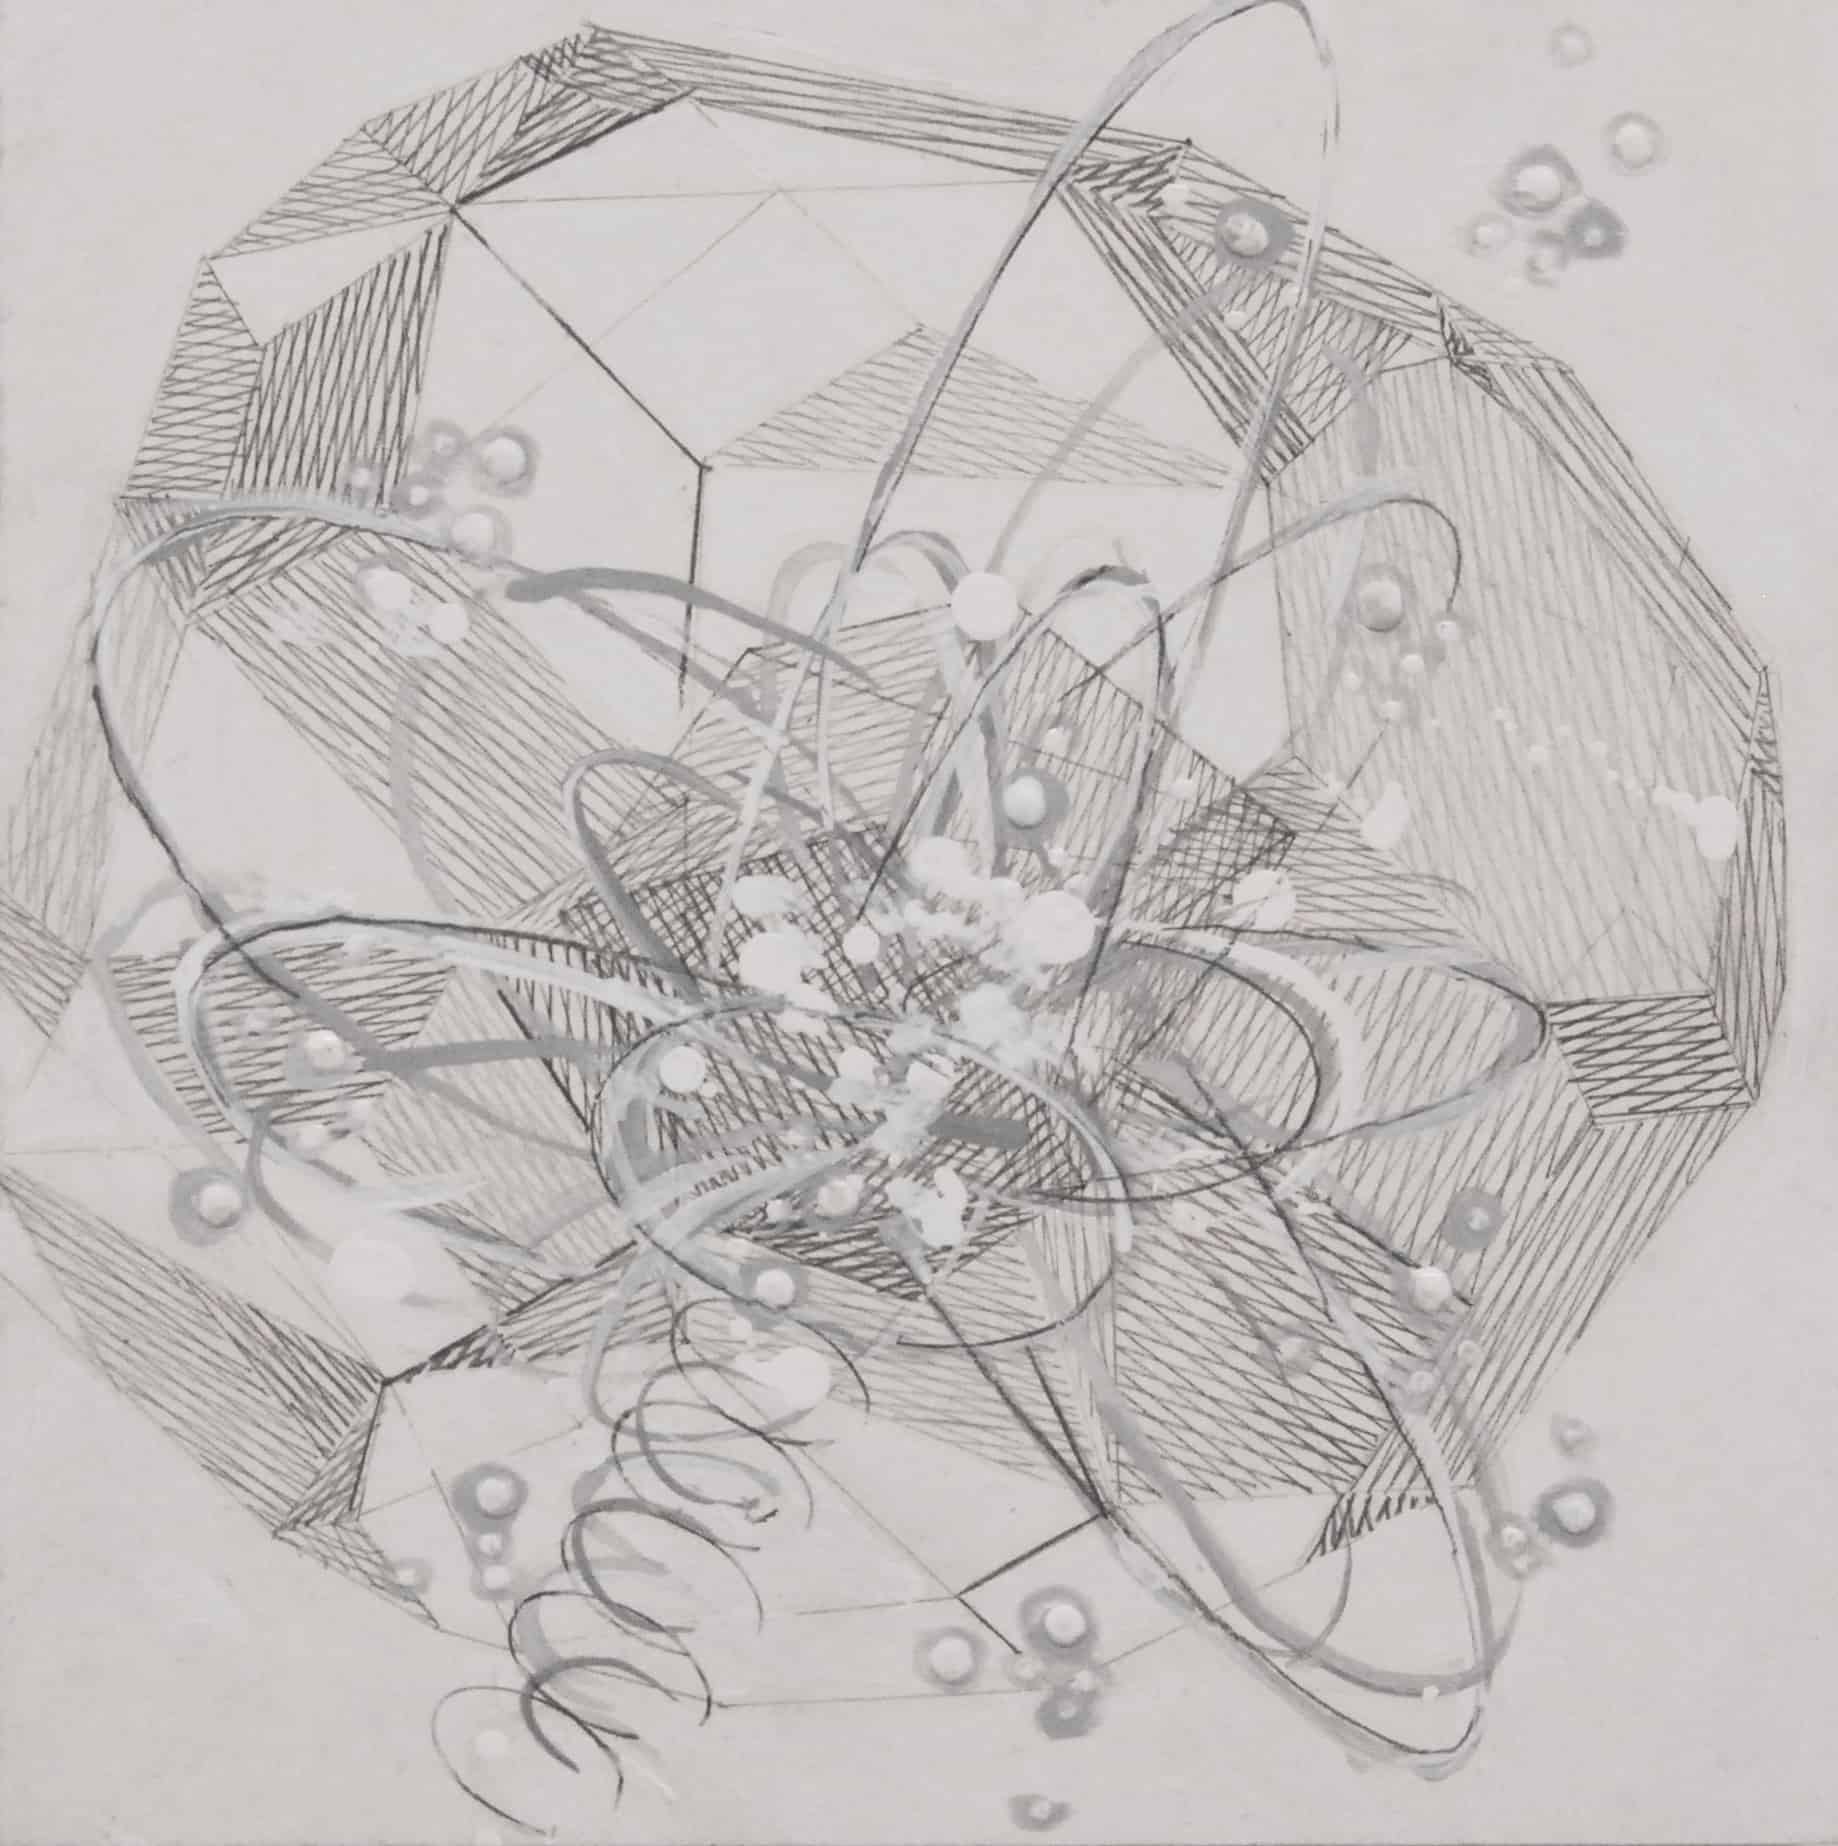 Roundabout Orbit, painting from Tesseract Study 21-F-05, 2021, graphite pencil & oil on board (black frame), 8 x 8